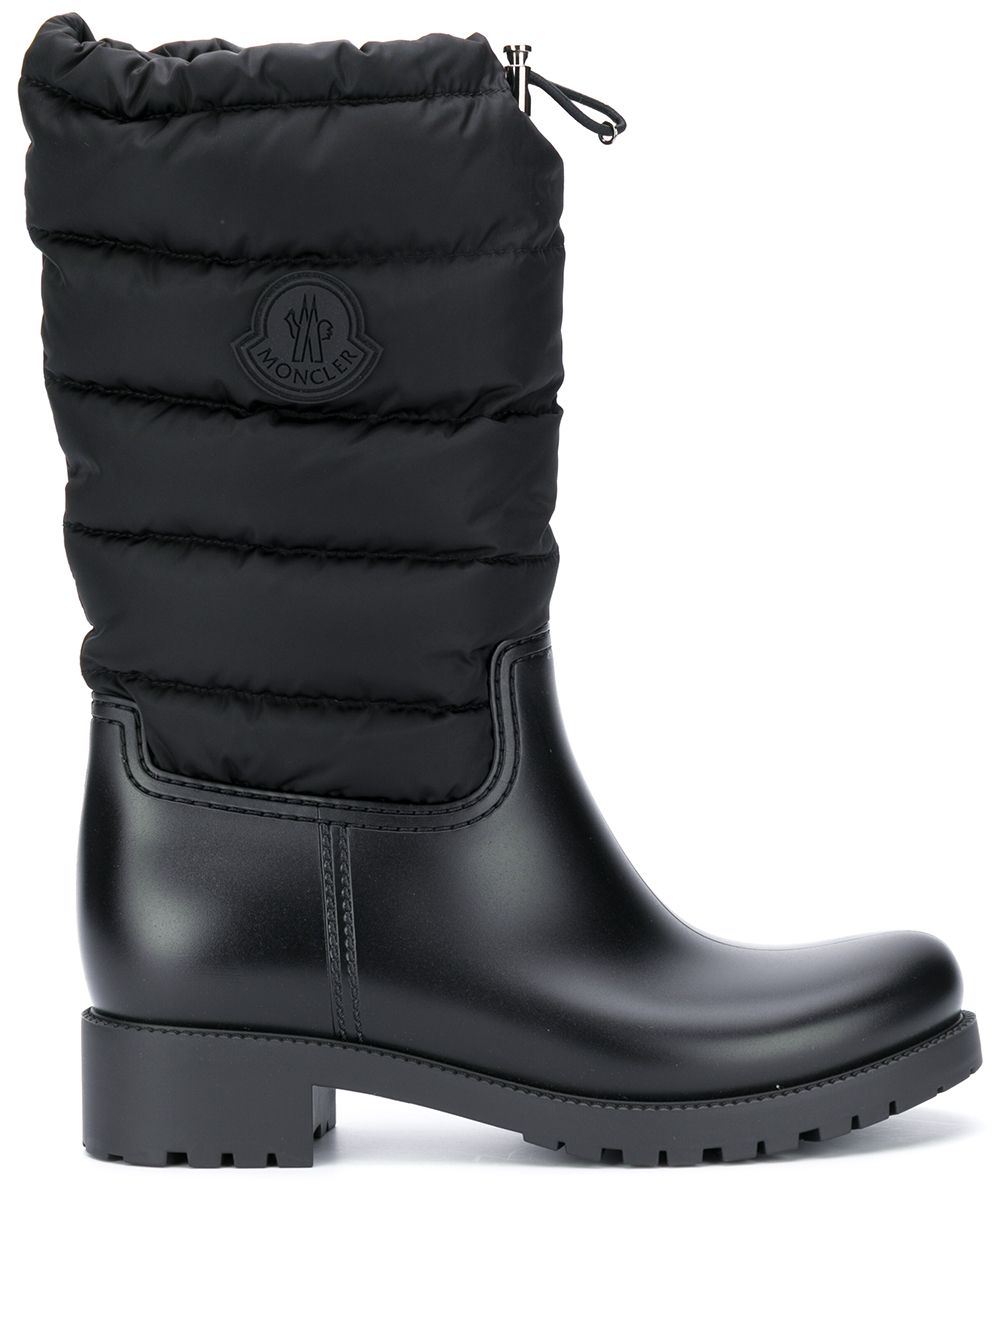 Moncler Ginette Padded Boots - Farfetch